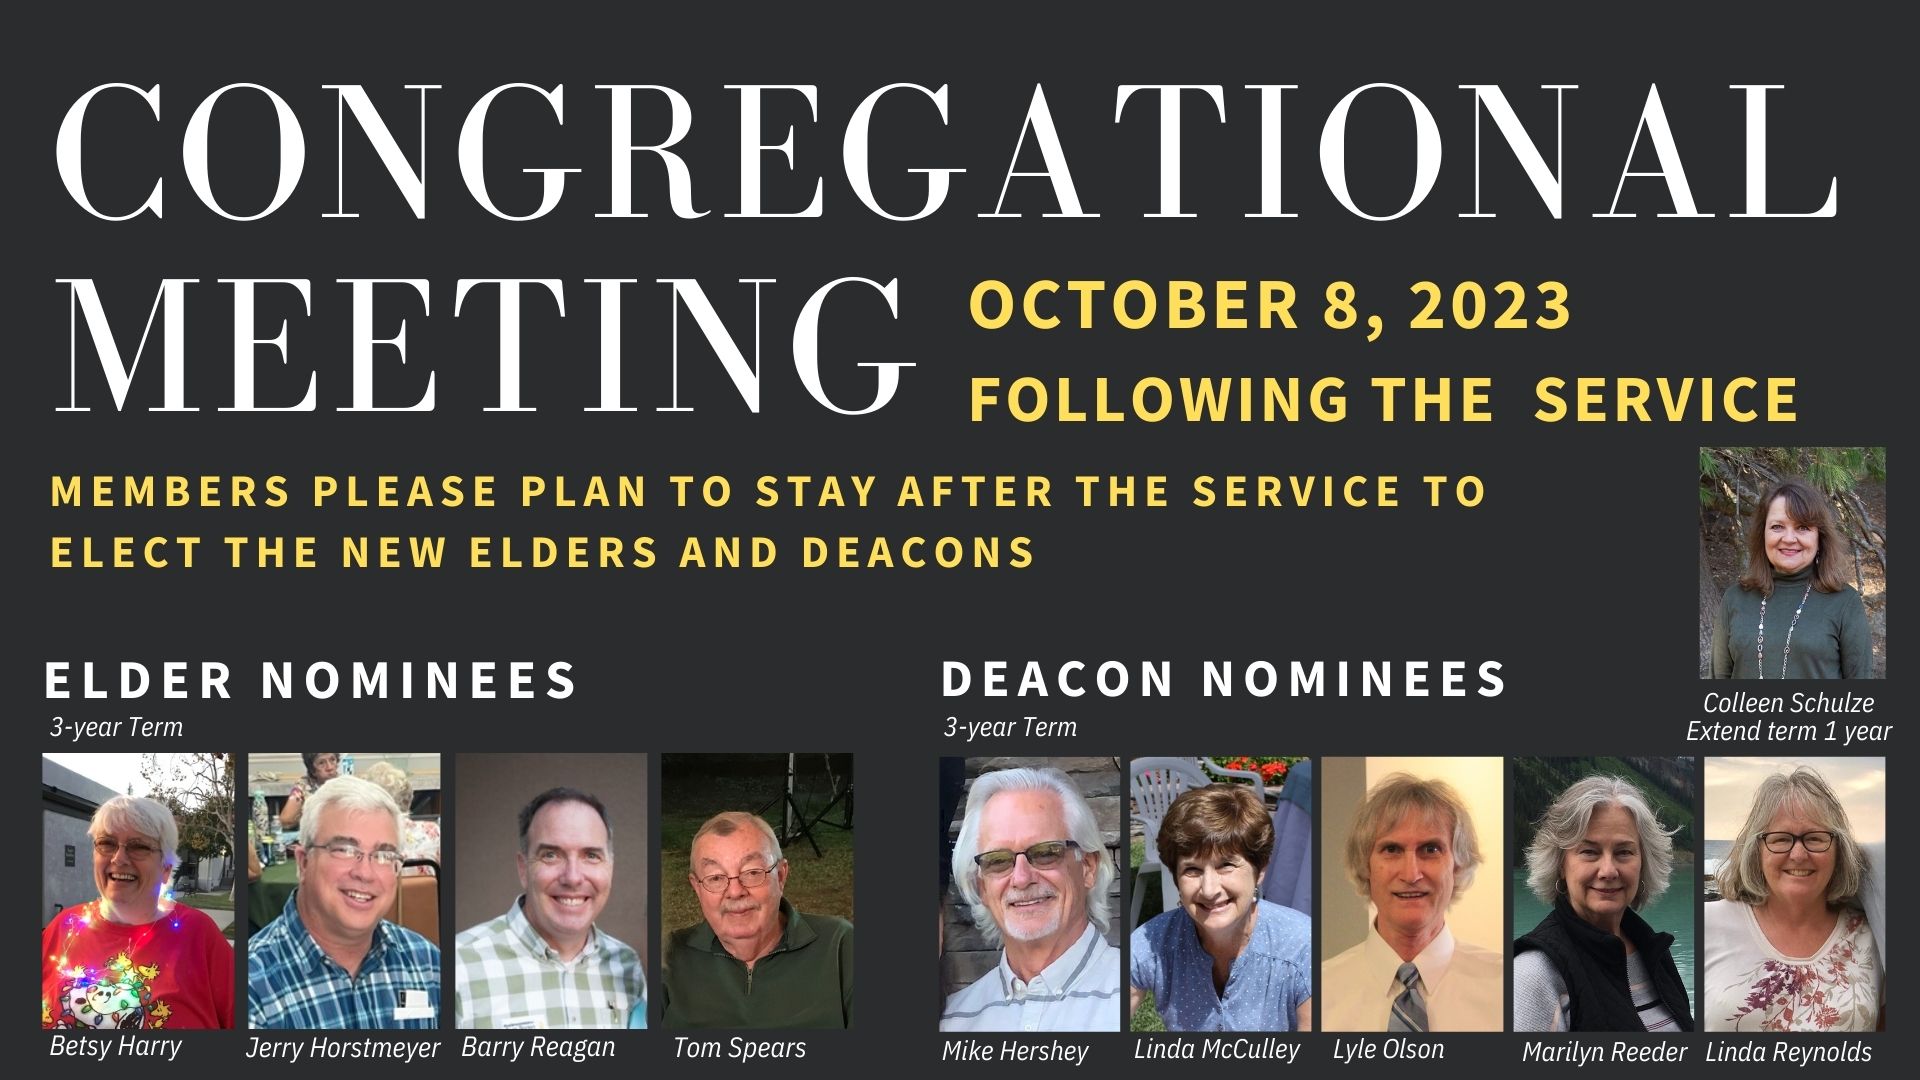 Congregational Meeting October 8 to elect new elders and deacons